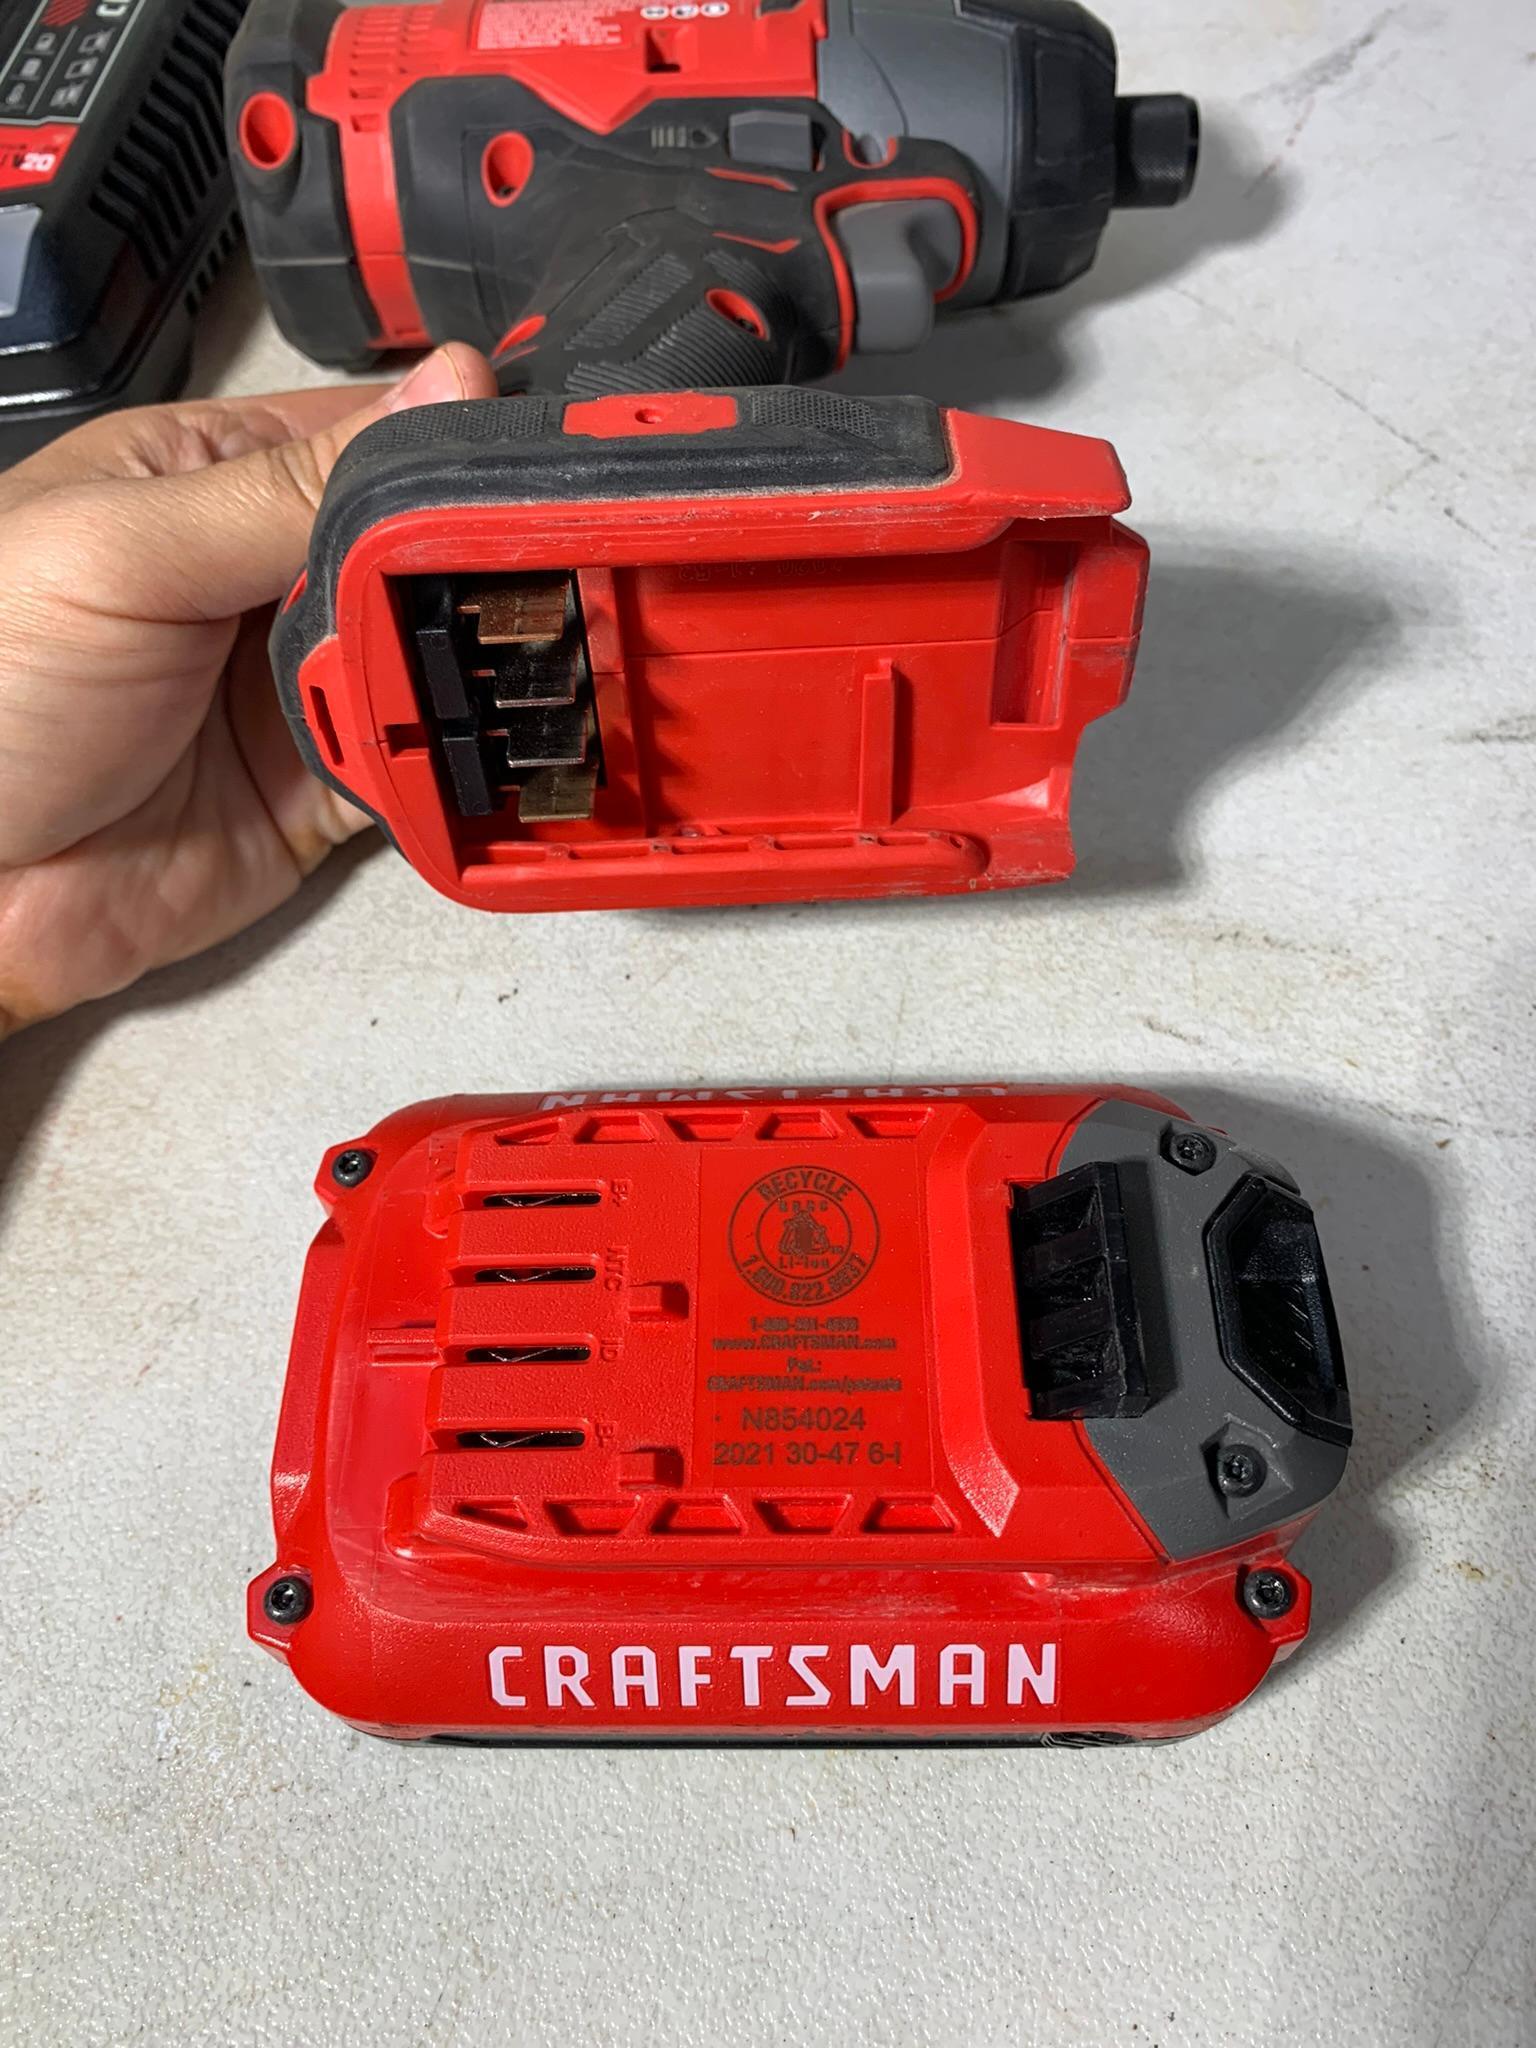 Craftsman Drill / Driver, Charger and 2 Batteries